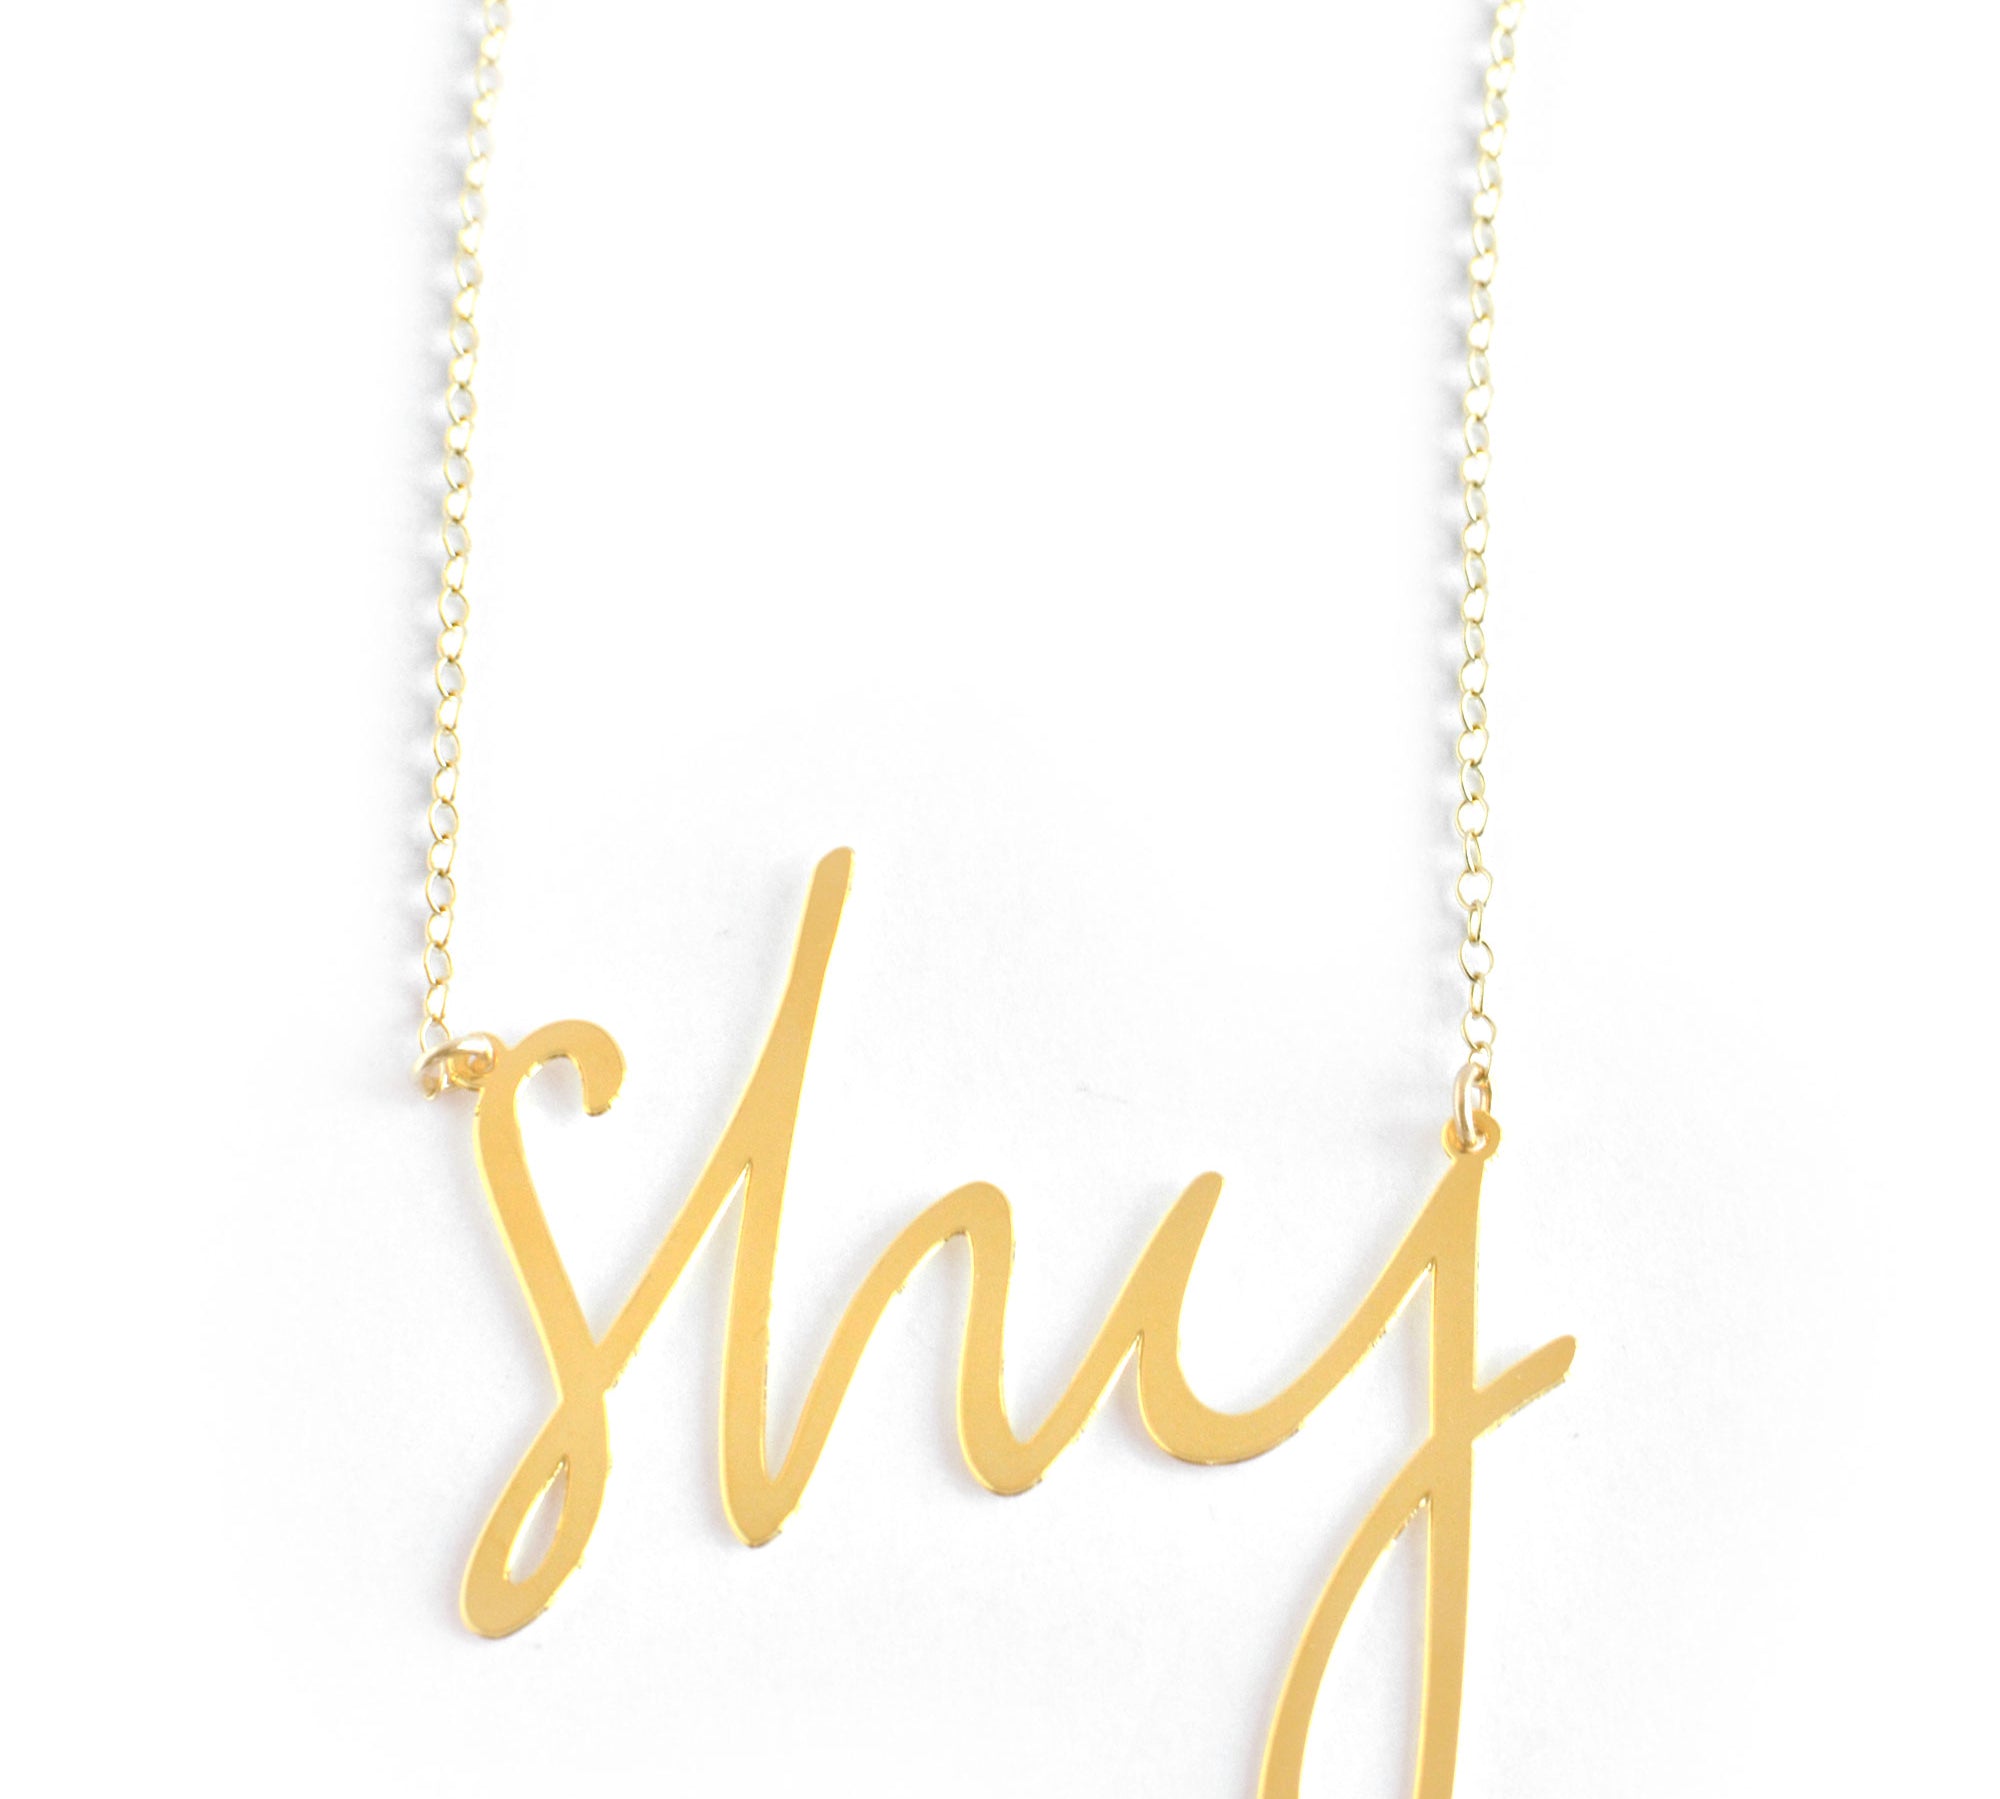 Shy Necklace - High Quality, Affordable, Hand Written, Self Love, Mantra Word Necklace - Available in Gold and Silver - Small and Large Sizes - Made in USA - Brevity Jewelry